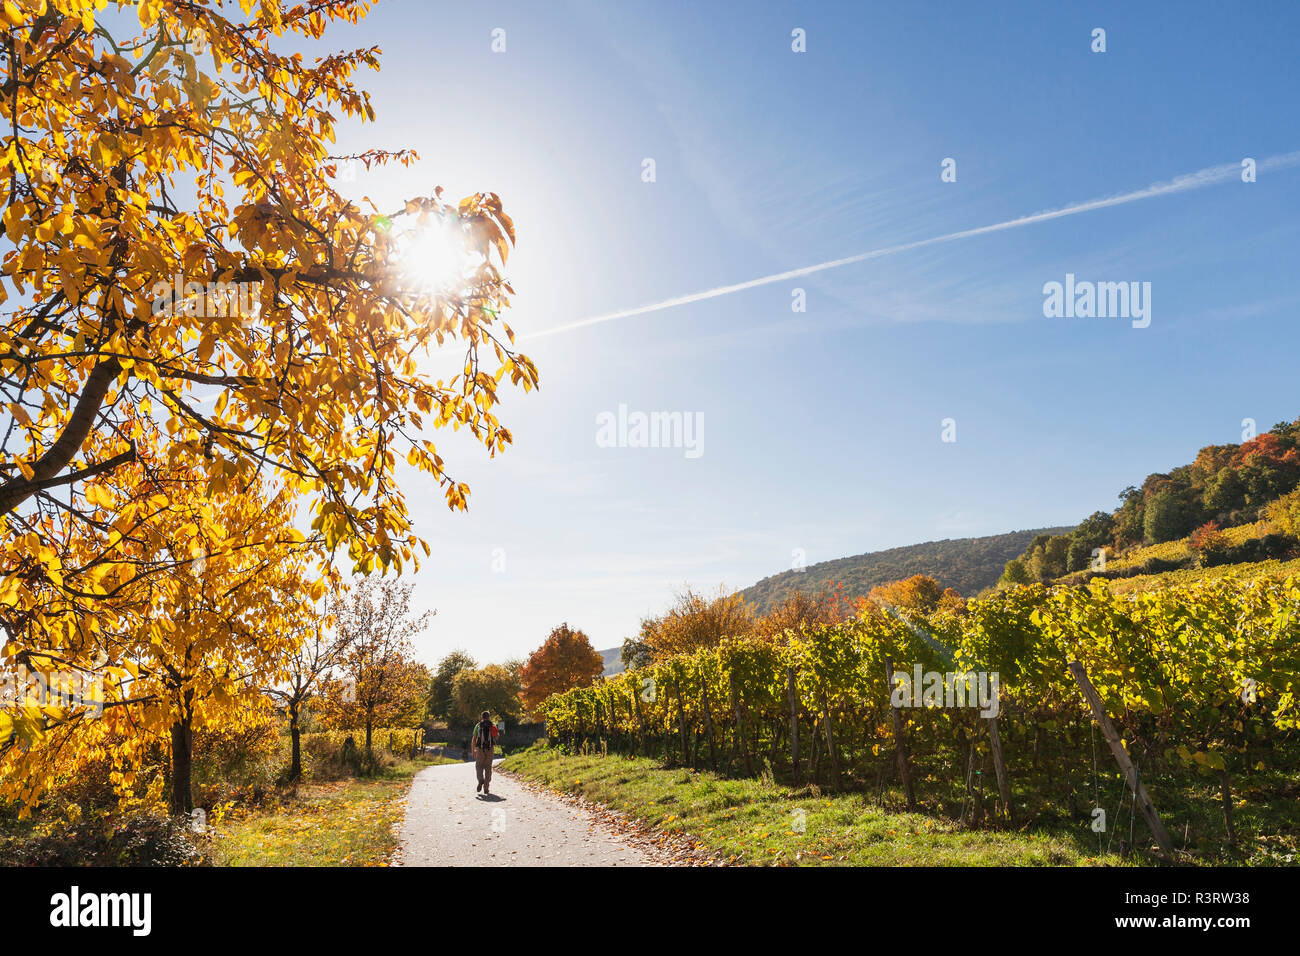 Germany, Rhineland Palatinate, Pfalz, hiker on wine-route-hiking-trail, vineyards and cherry trees in autumn colours Stock Photo